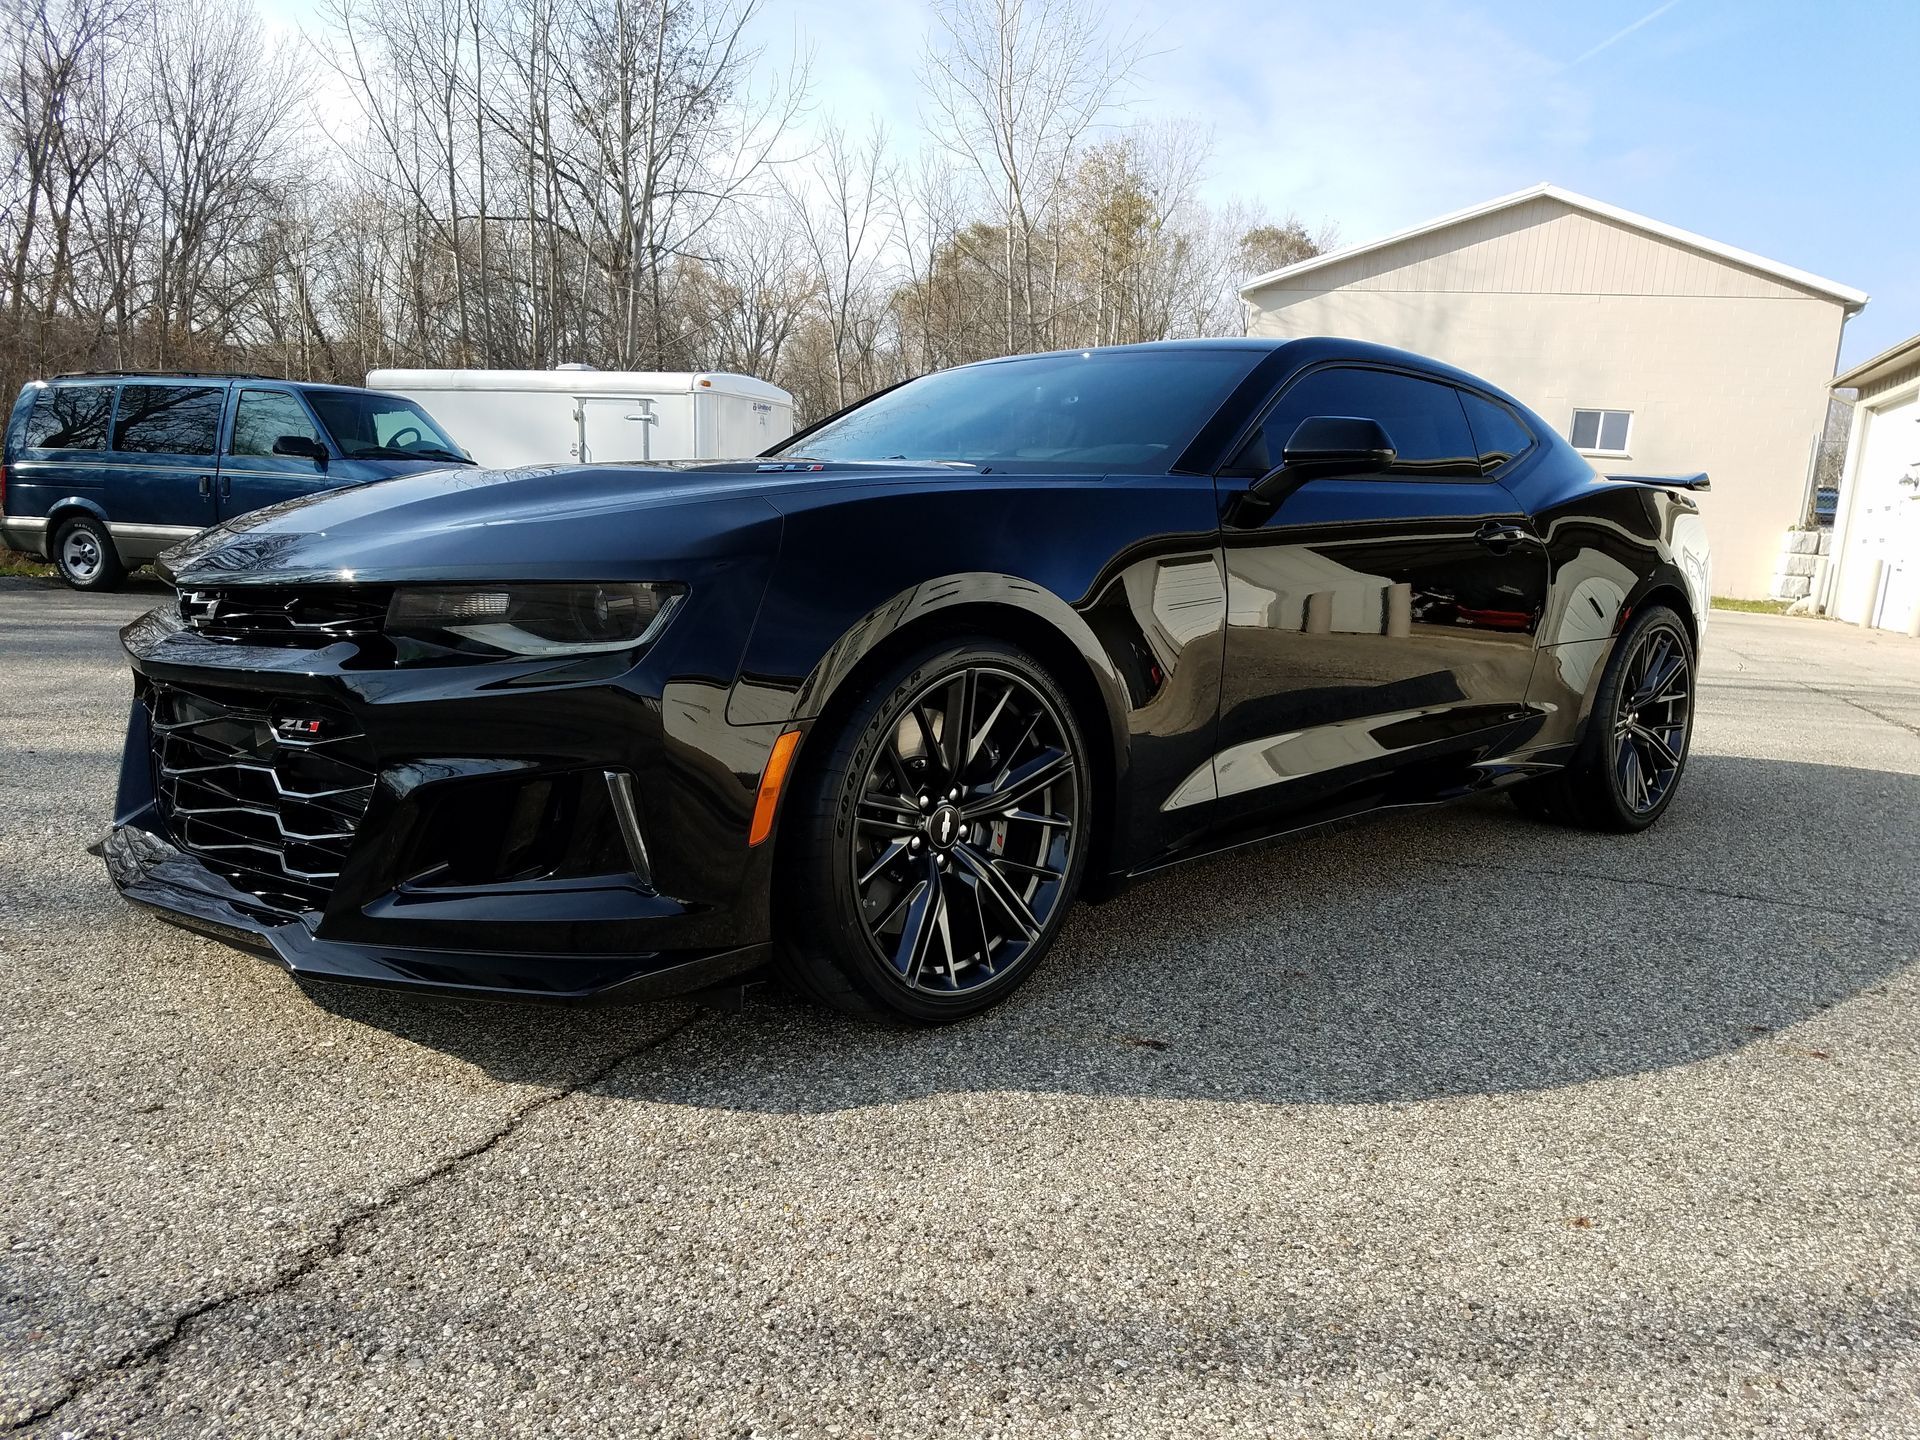 A black chevrolet camaro zl1 is parked in a parking lot.